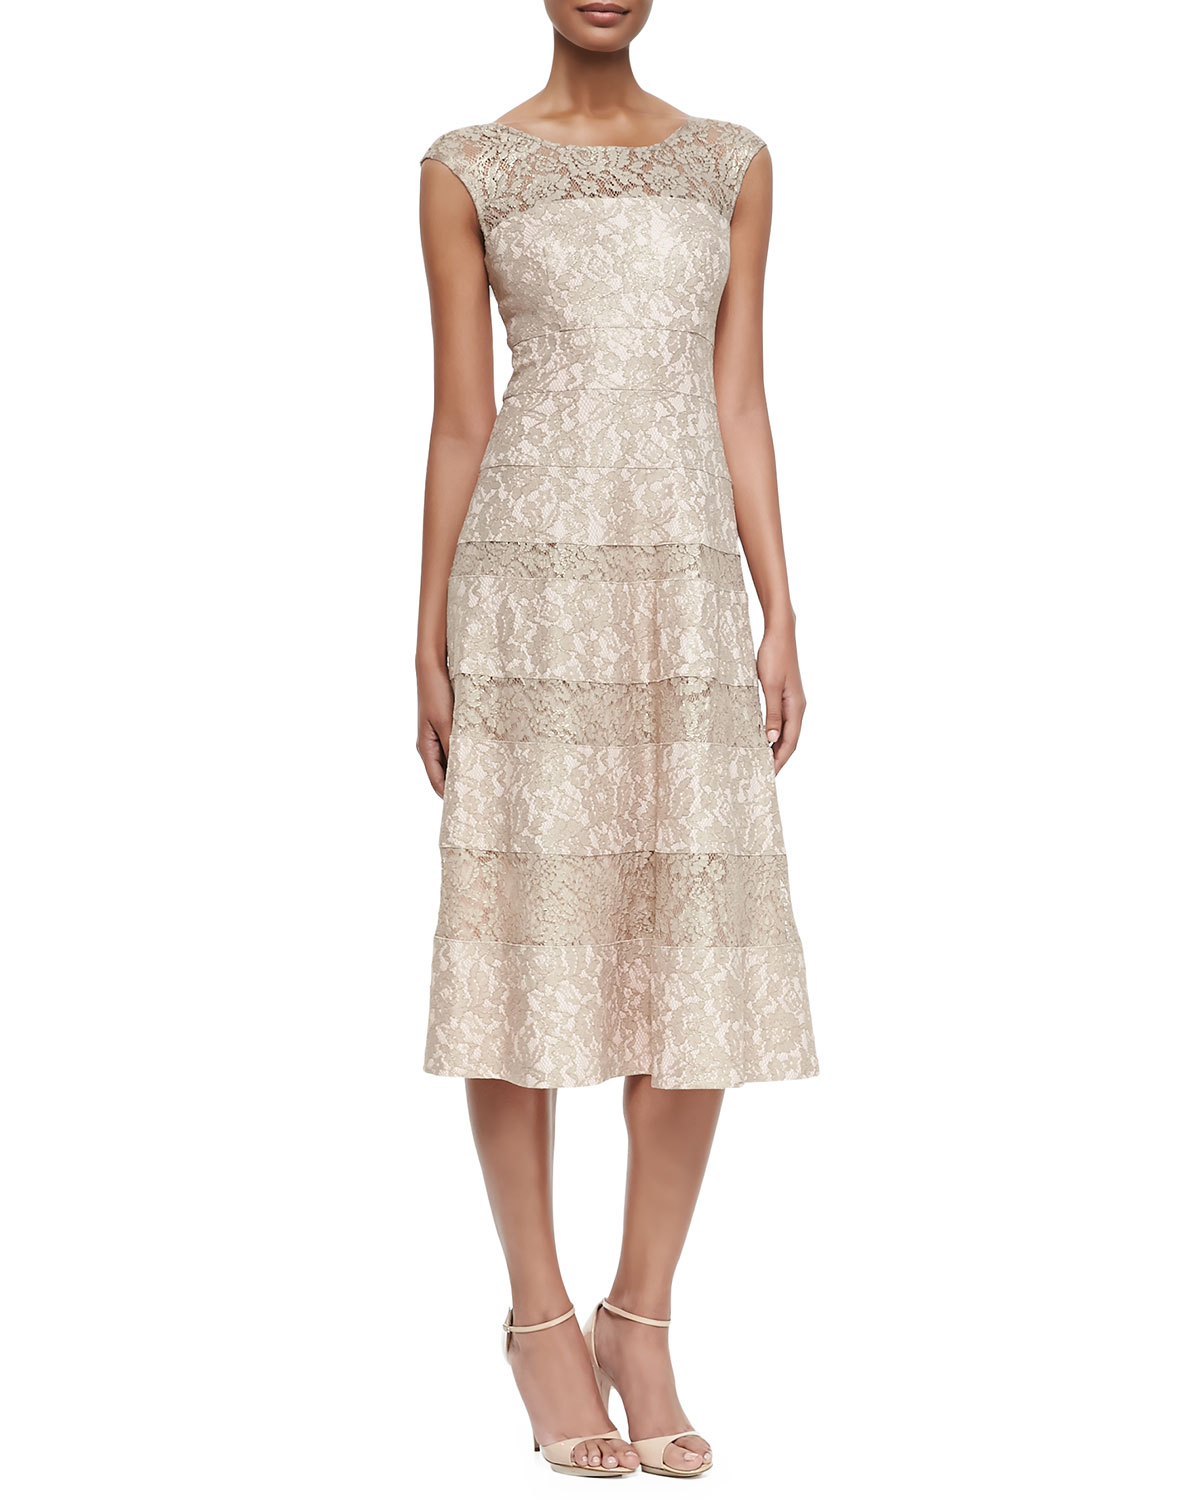 Lyst - Kay Unger Sleeveless Lace Tea-length Cocktail Dress in Natural